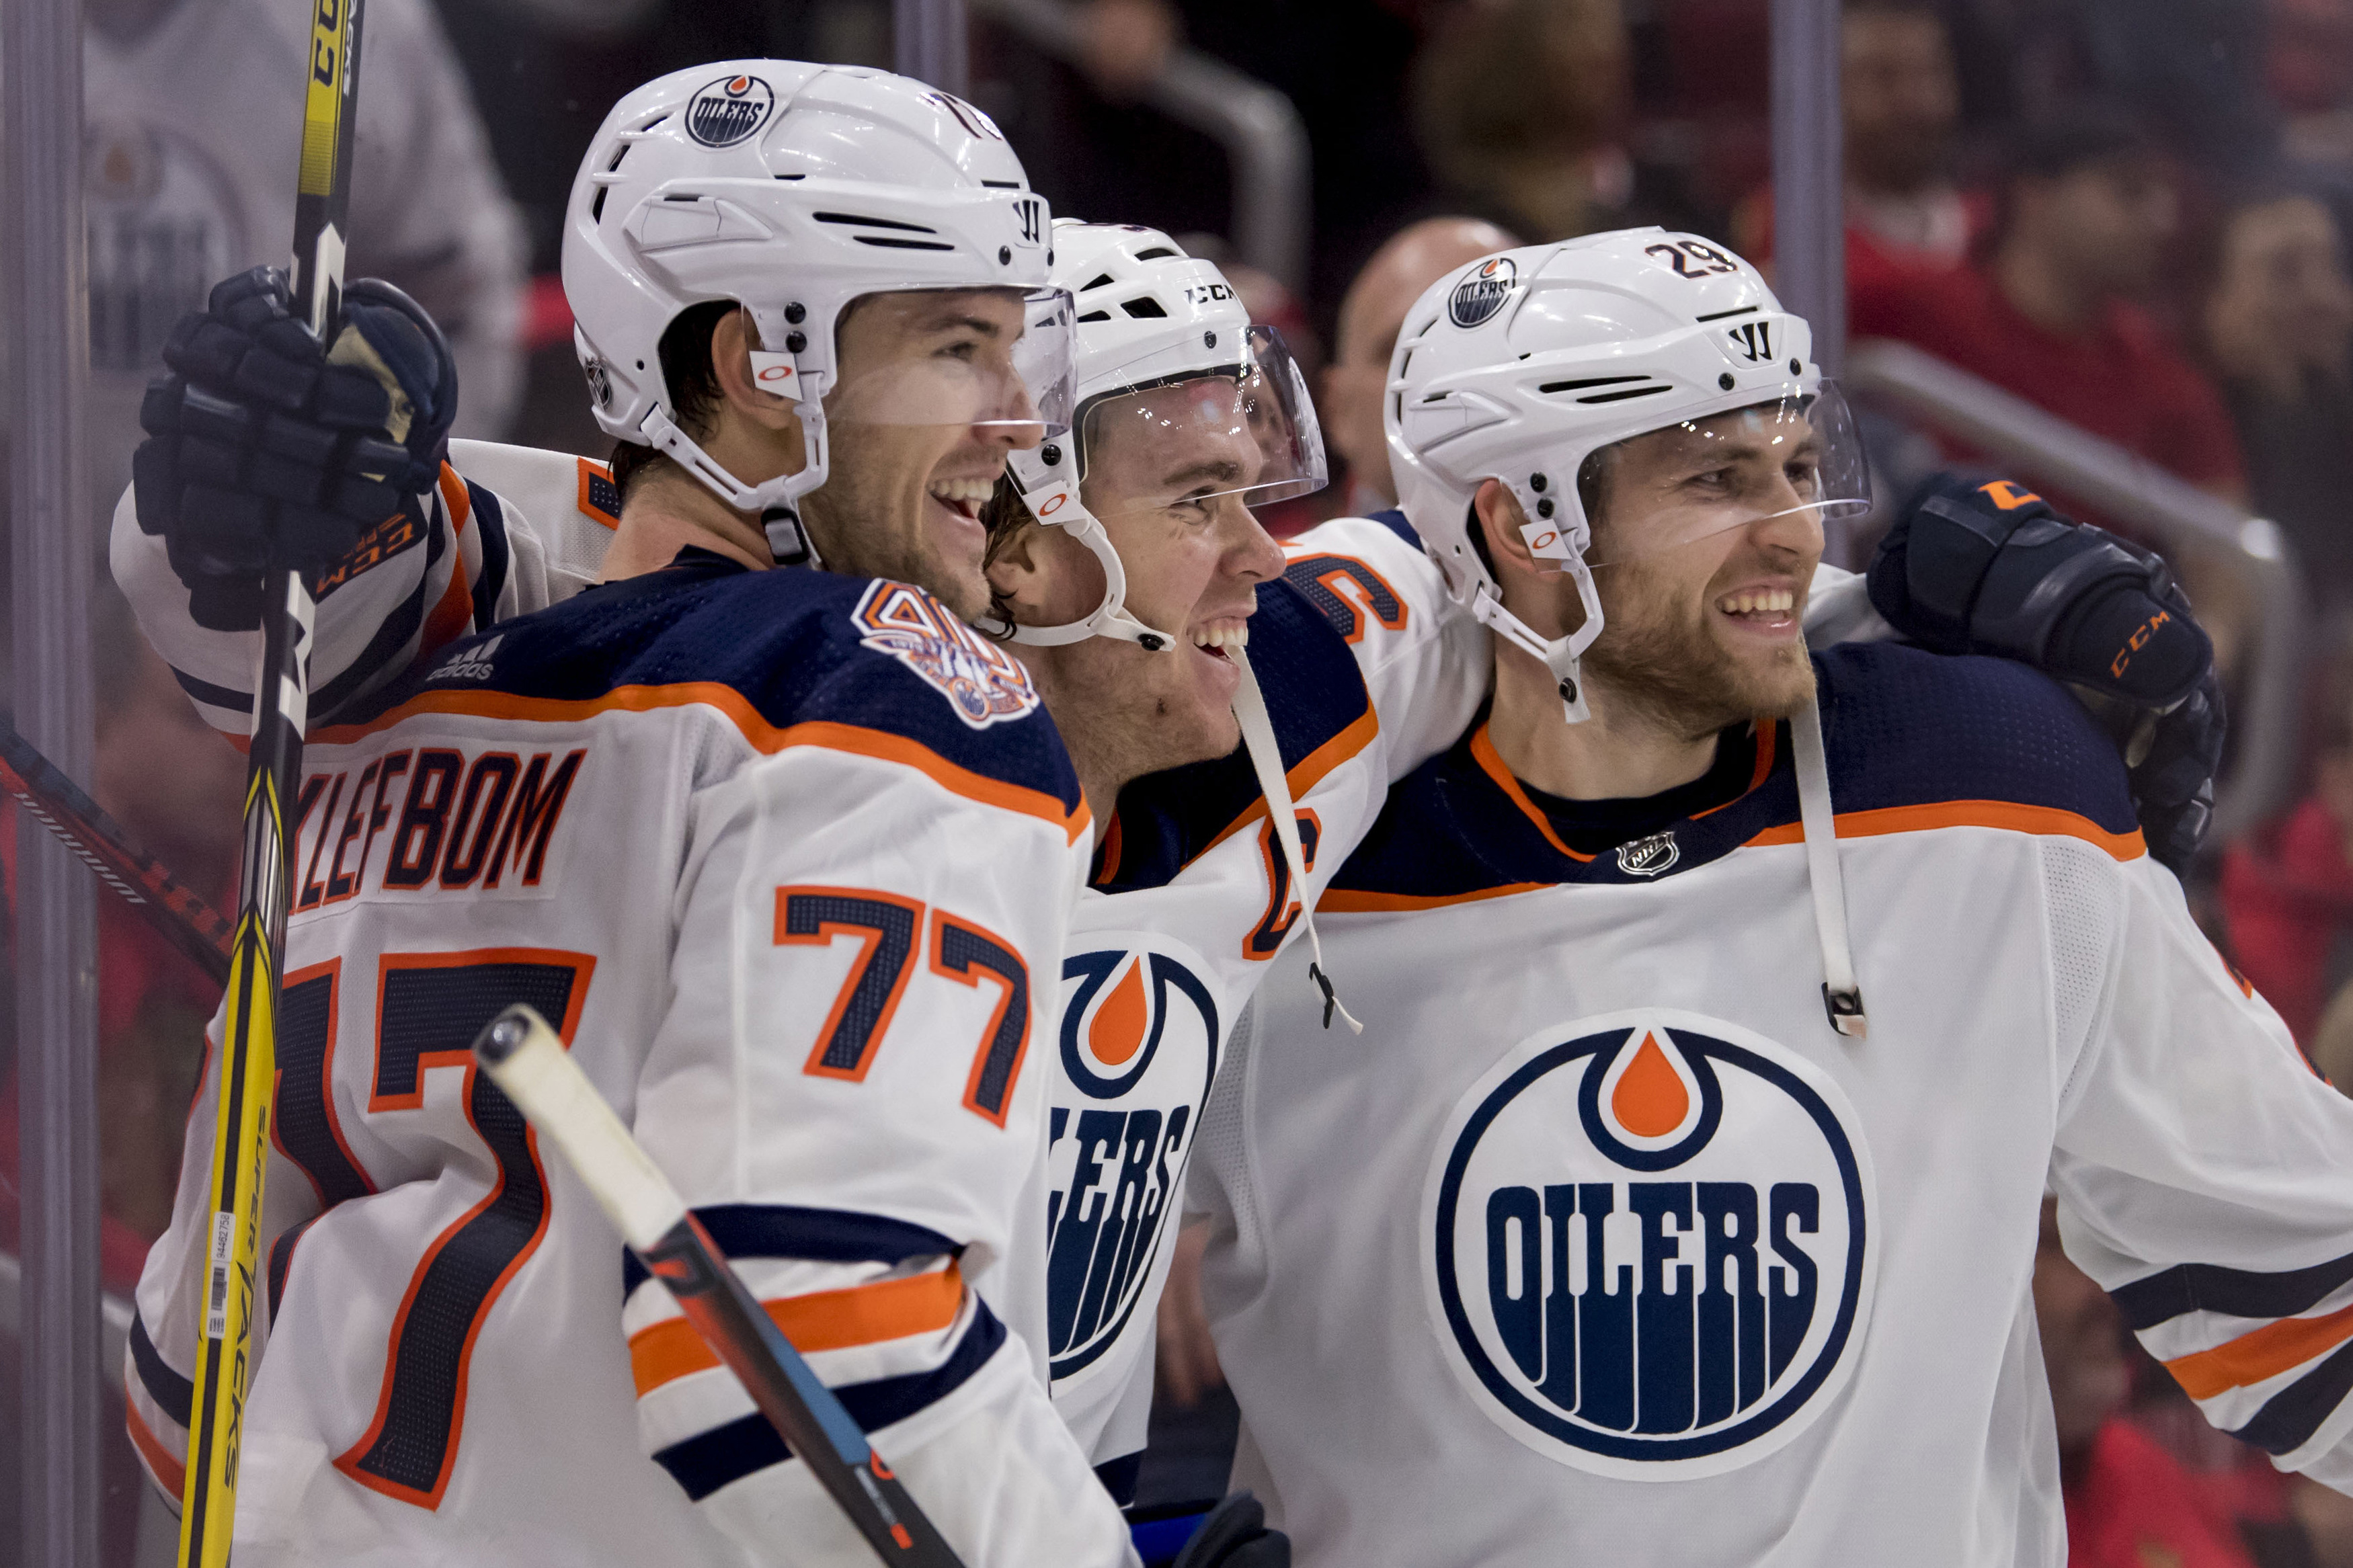 Oct 28, 2018; Chicago, IL, USA; Edmonton Oilers center Connor McDavid (center) celebrates his game winning overtime goal with center Leon Draisaitl (right) and defenseman Oscar Klefbom (left) during overtime against the Chicago Blackhawks at the United Ce